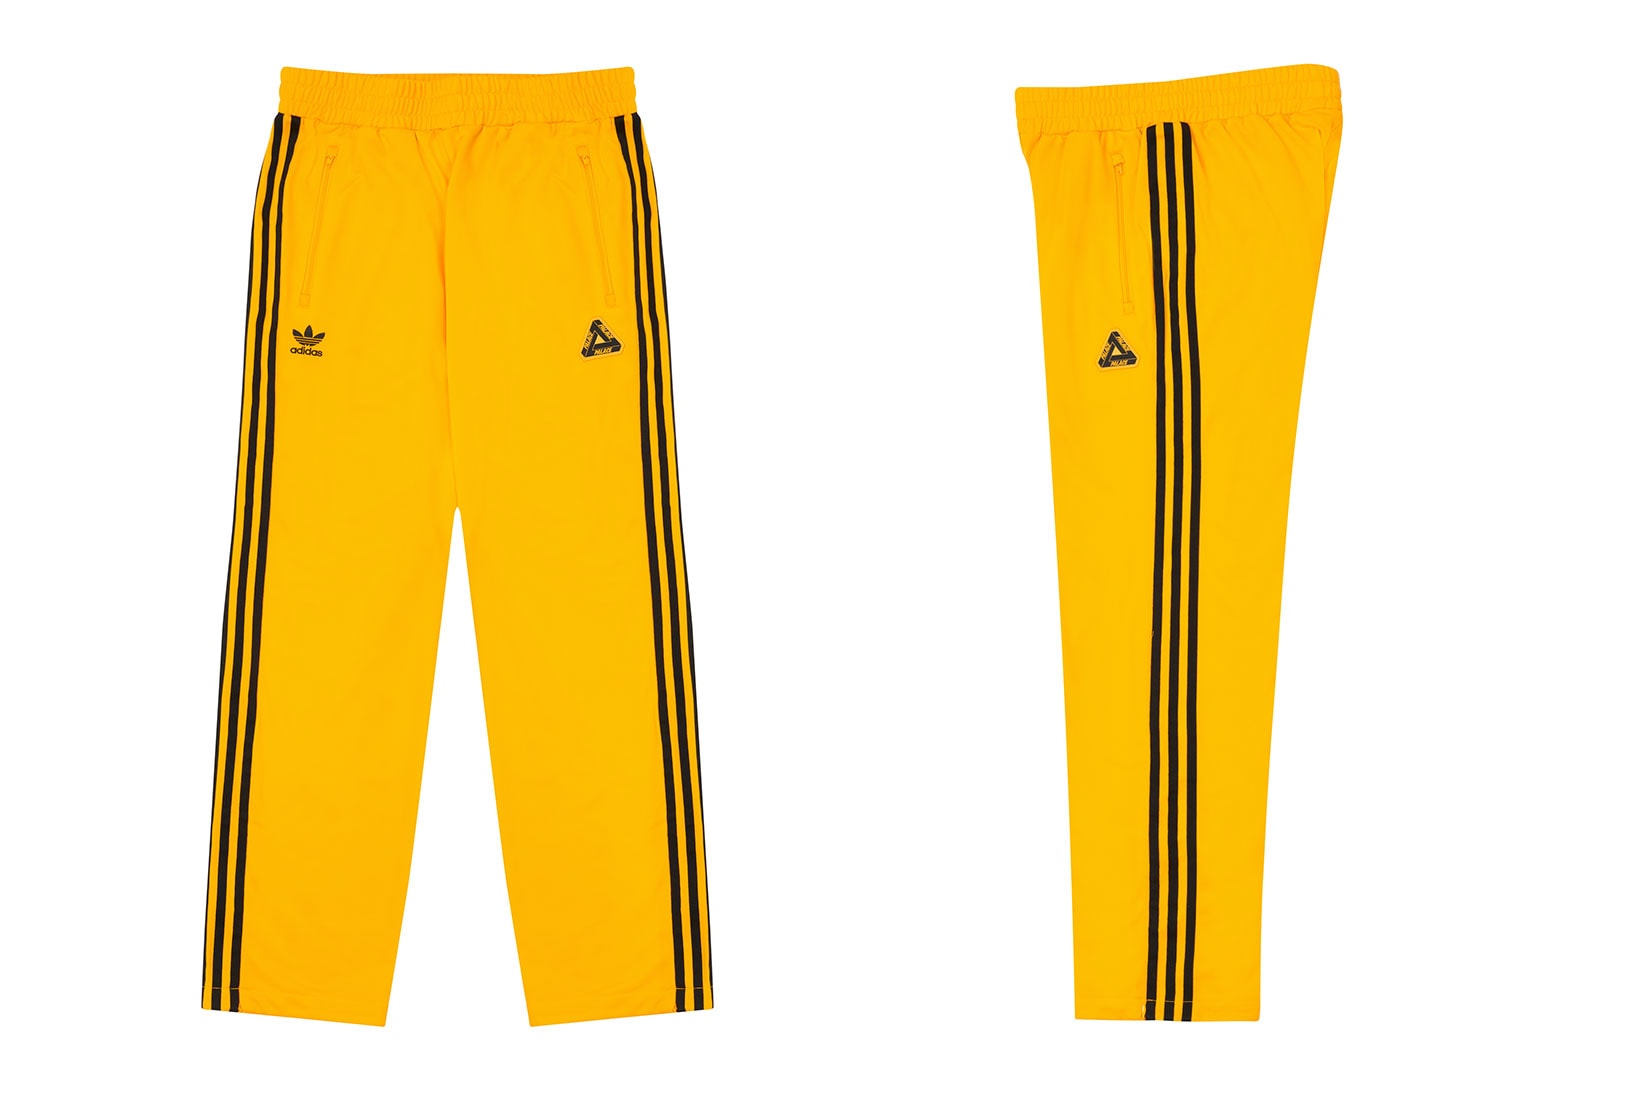 palace skateboards holiday drop 5 adidas originals tracksuits yellow pants release when to buy